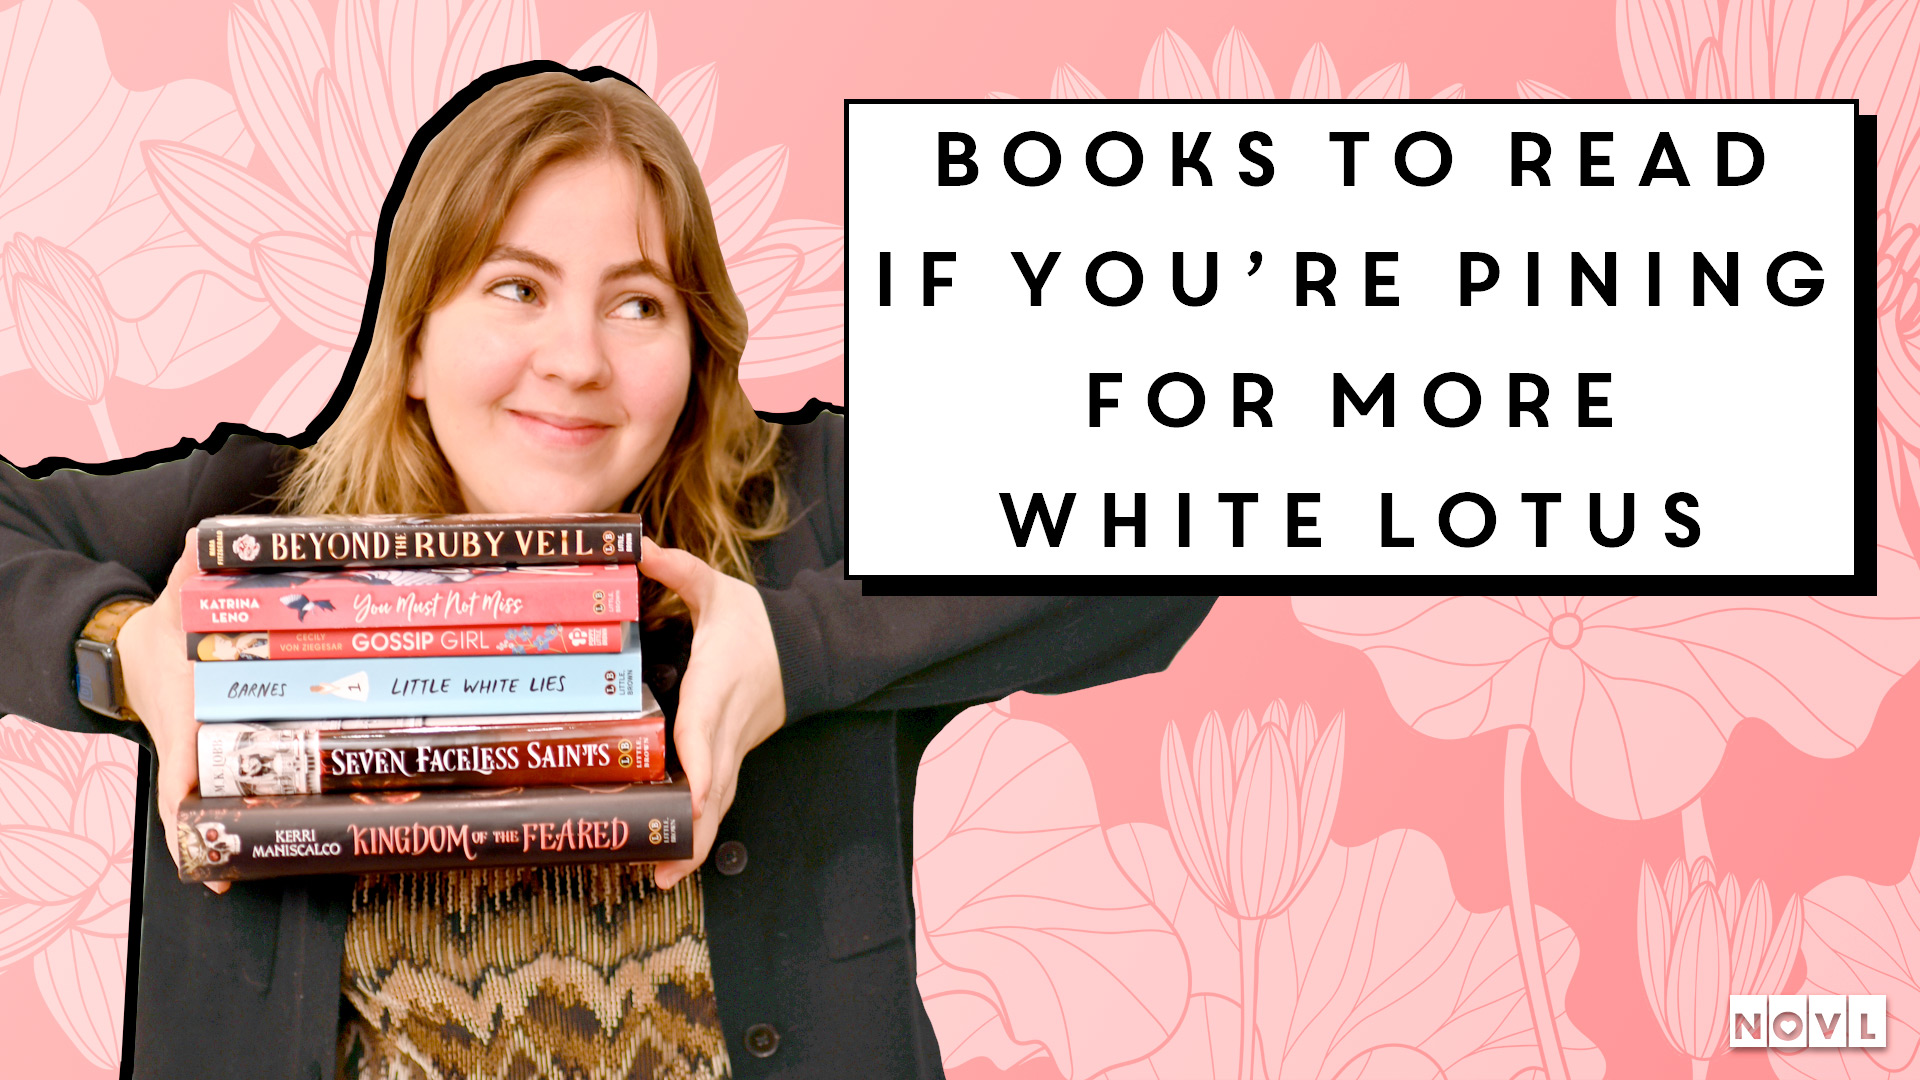 The NOVL Blog, Featured Image for Article: Book to Read if You're Pining for the White Lotus